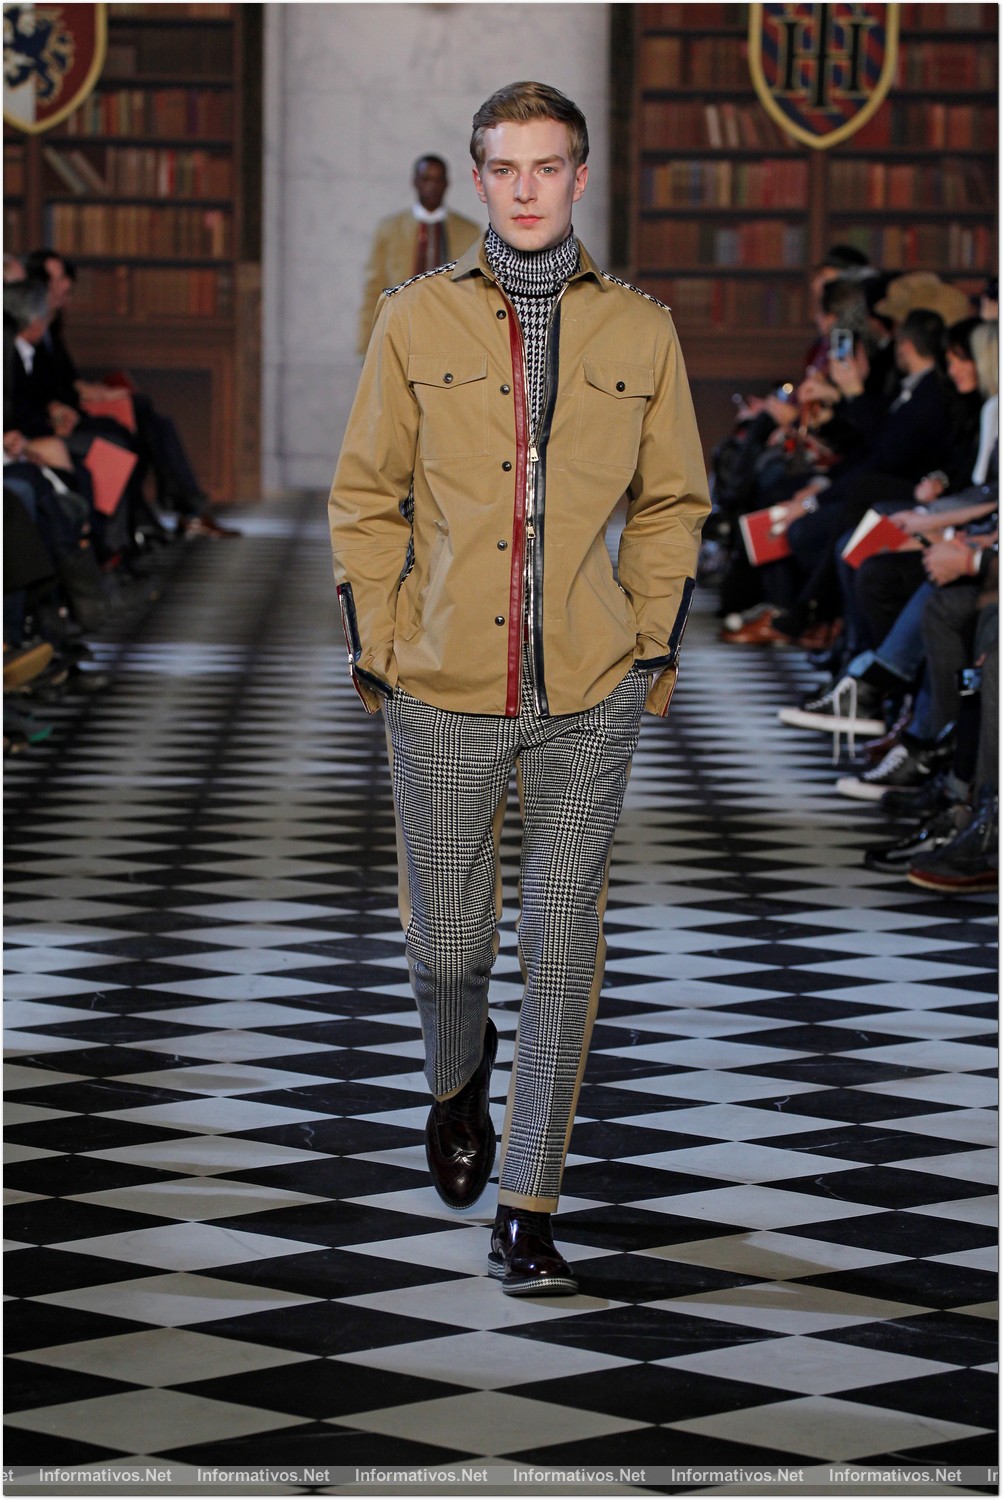 NY08FEB013.- Desfile Tommy Hilfiger Fall 2013 Men's Collection. 10. KIM D